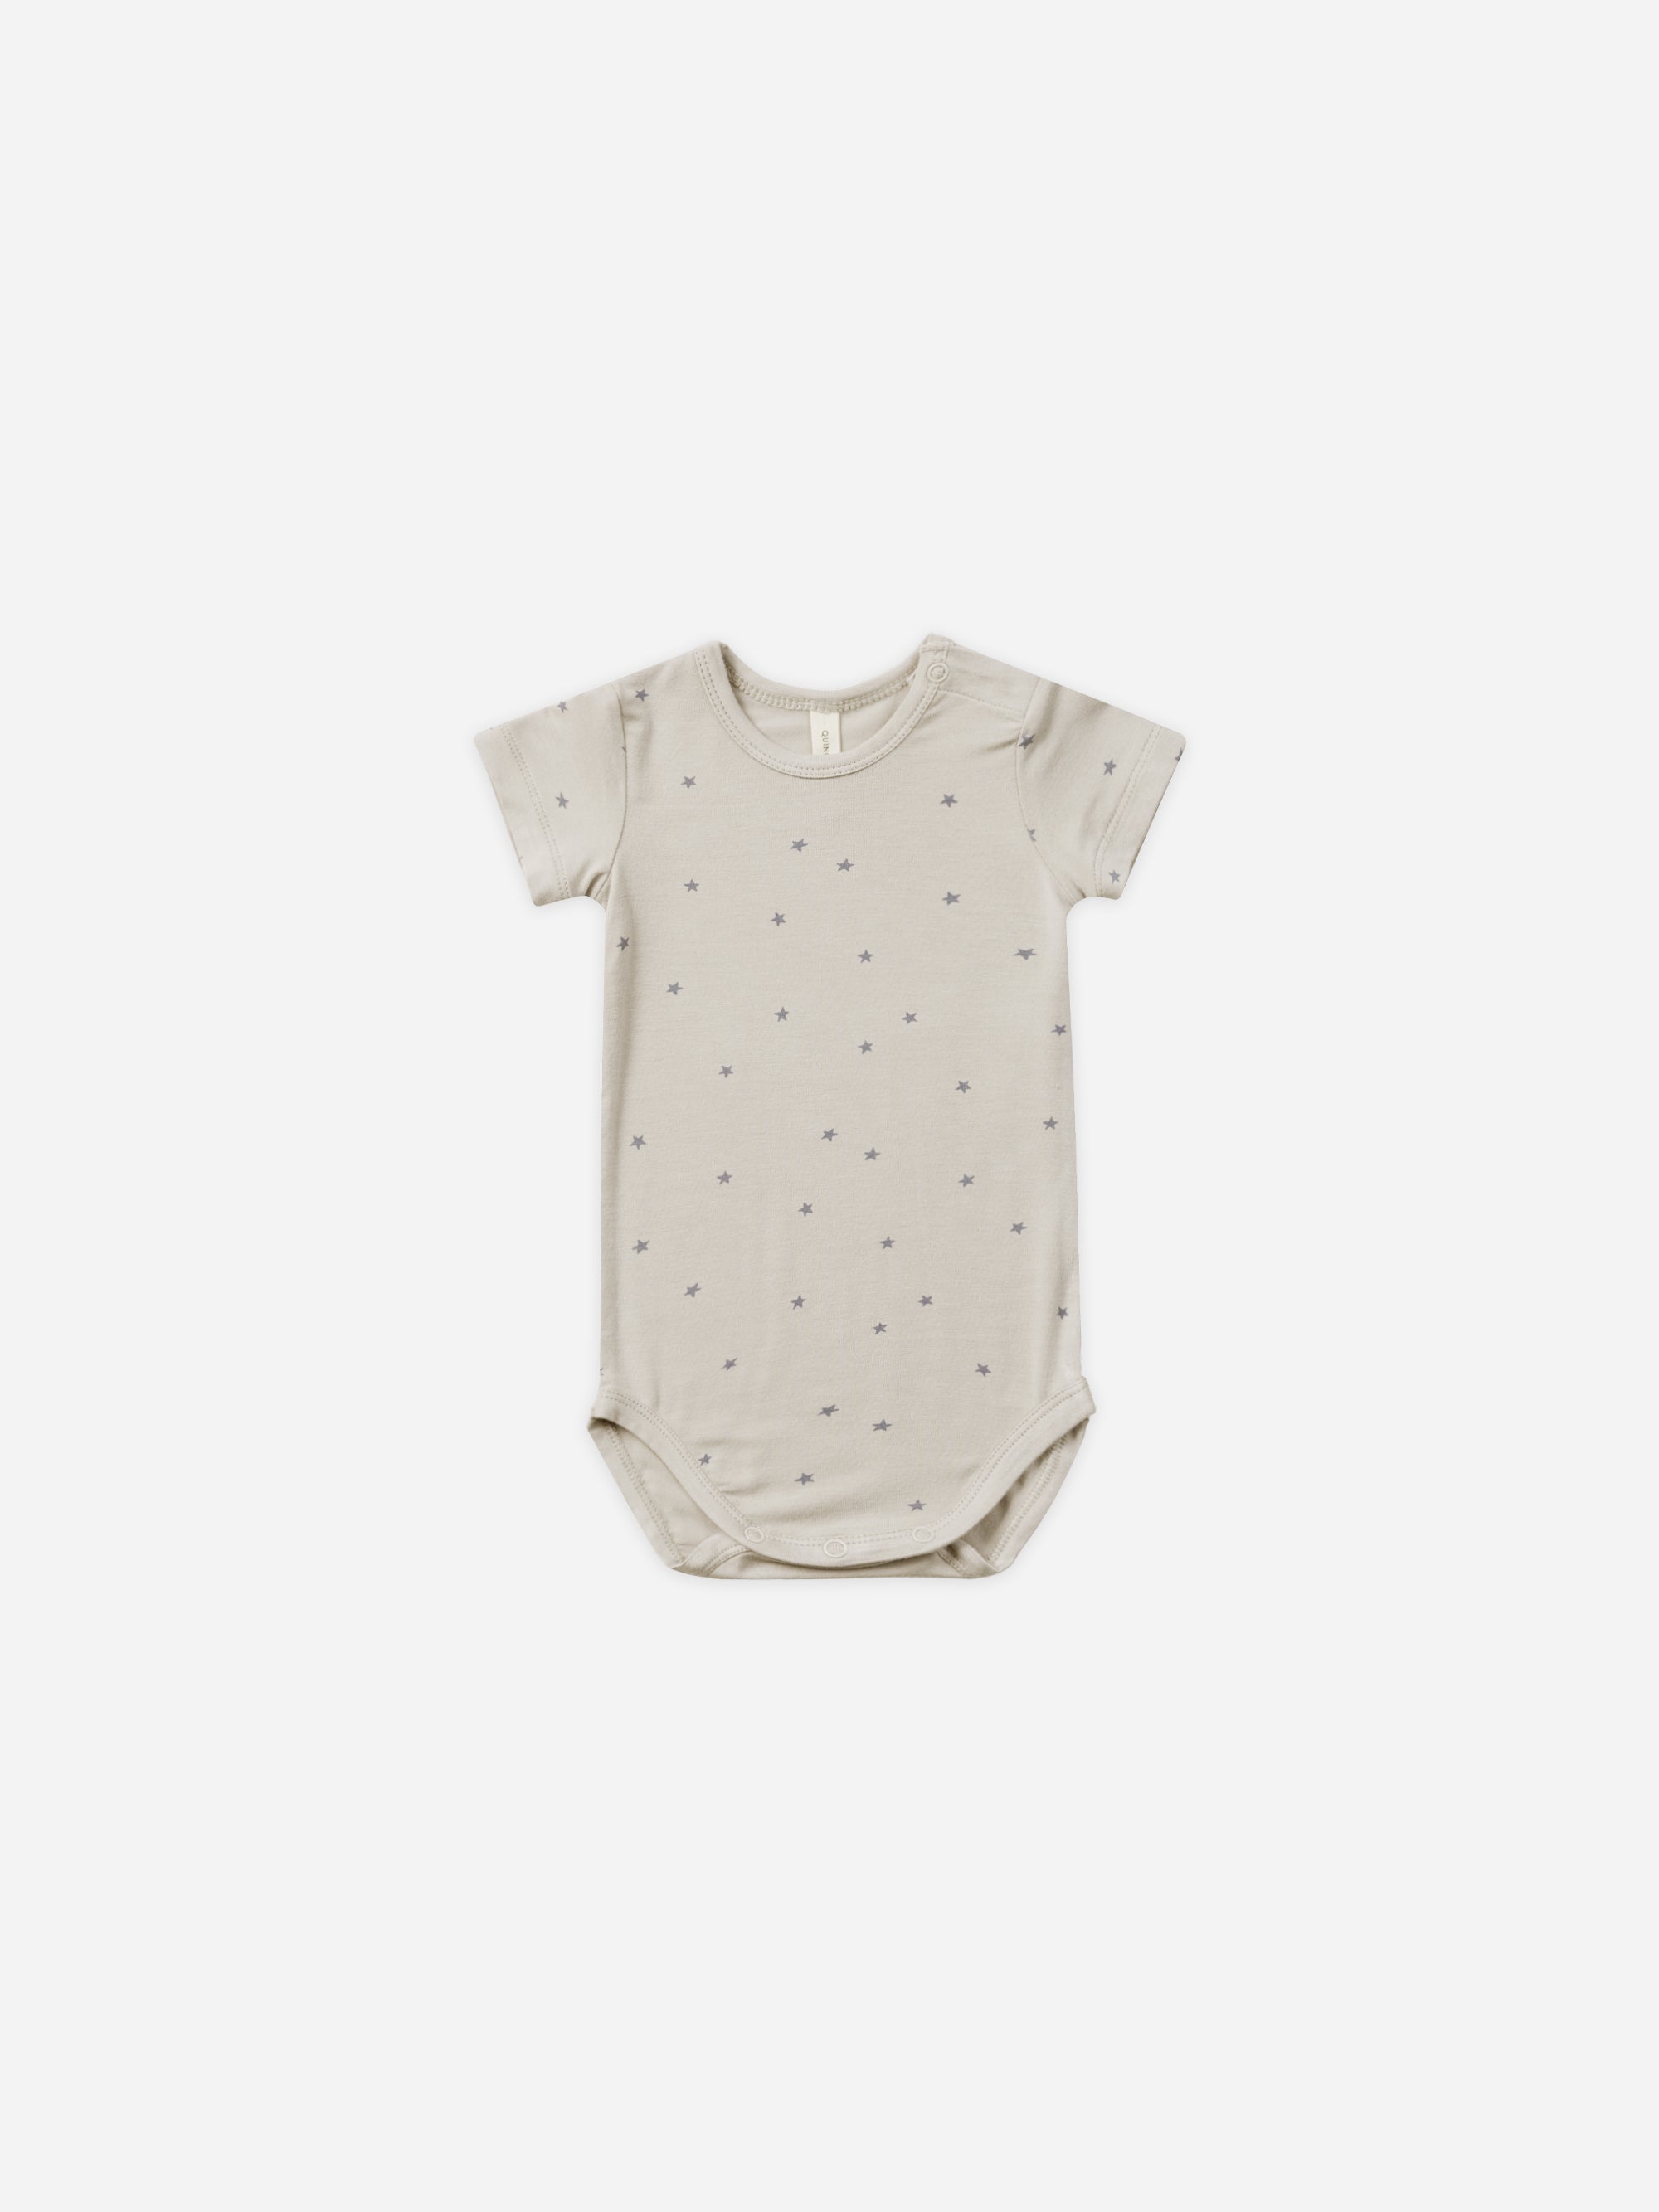 Bamboo Short Sleeve Bodysuit || Stars - Rylee + Cru | Kids Clothes | Trendy Baby Clothes | Modern Infant Outfits |